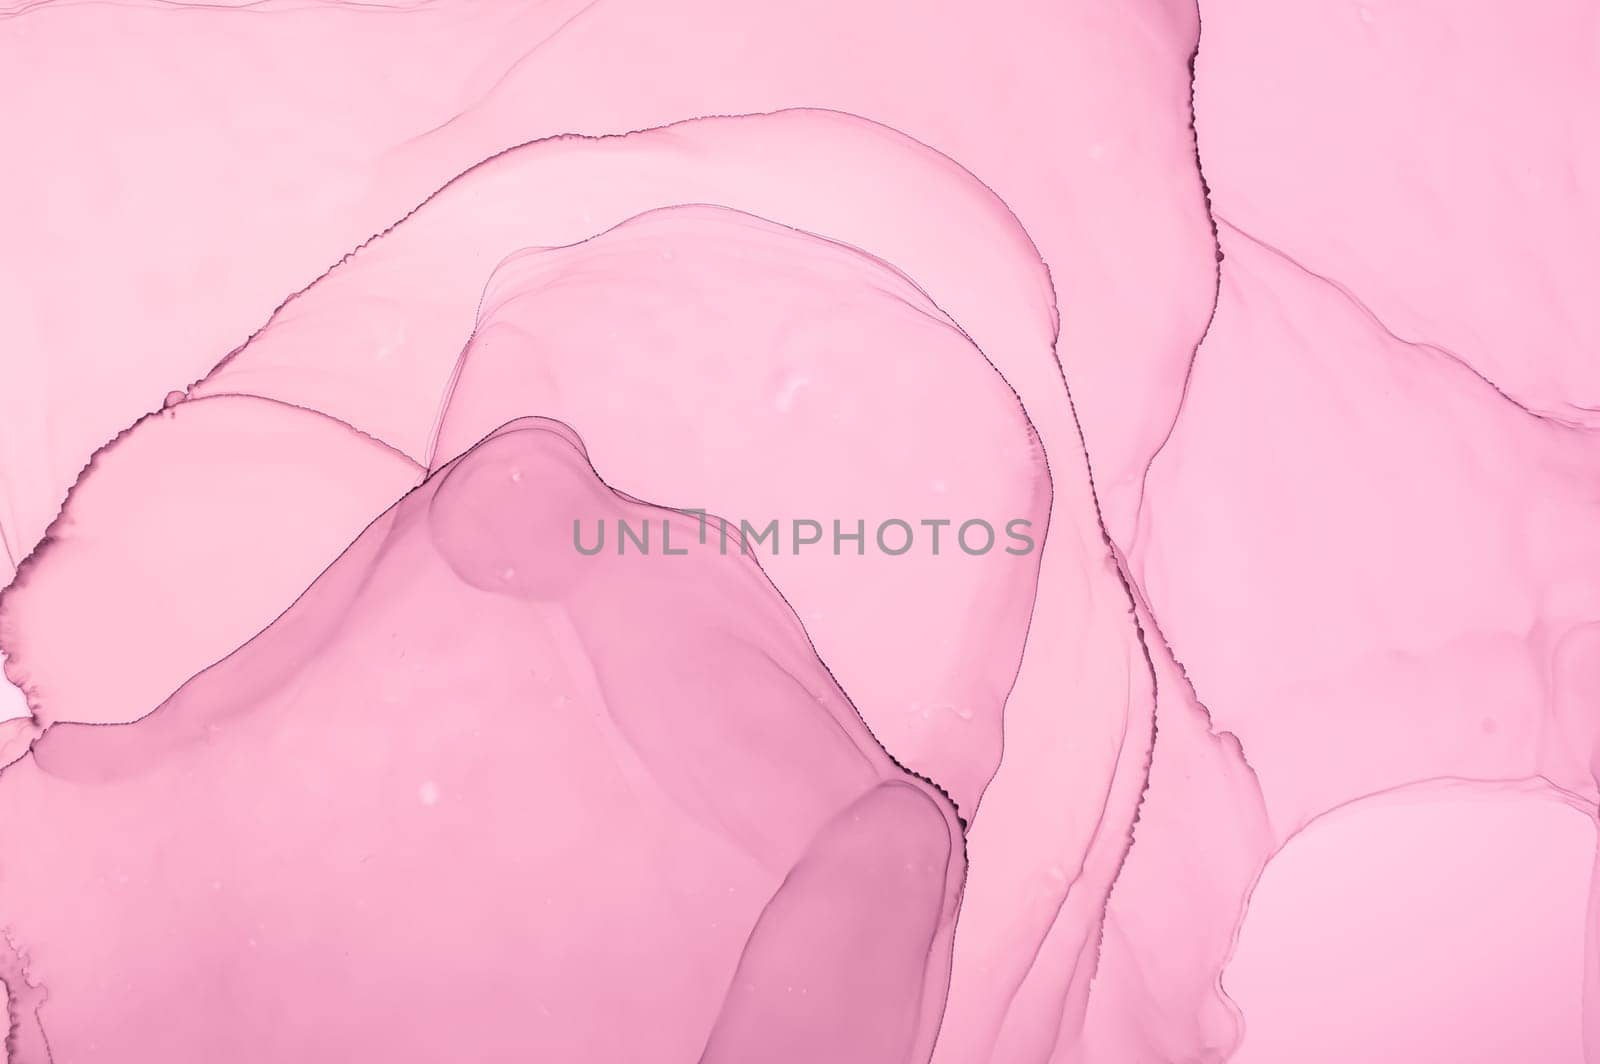 Feminine Luxury Marble. Abstract Background. Ink Color Design. Acrylic Drops. Rose Fluid Print. Alcohol Liquid Marble. Gentle Wallpaper. Art Grunge Effect. Watercolour Pink Marble.